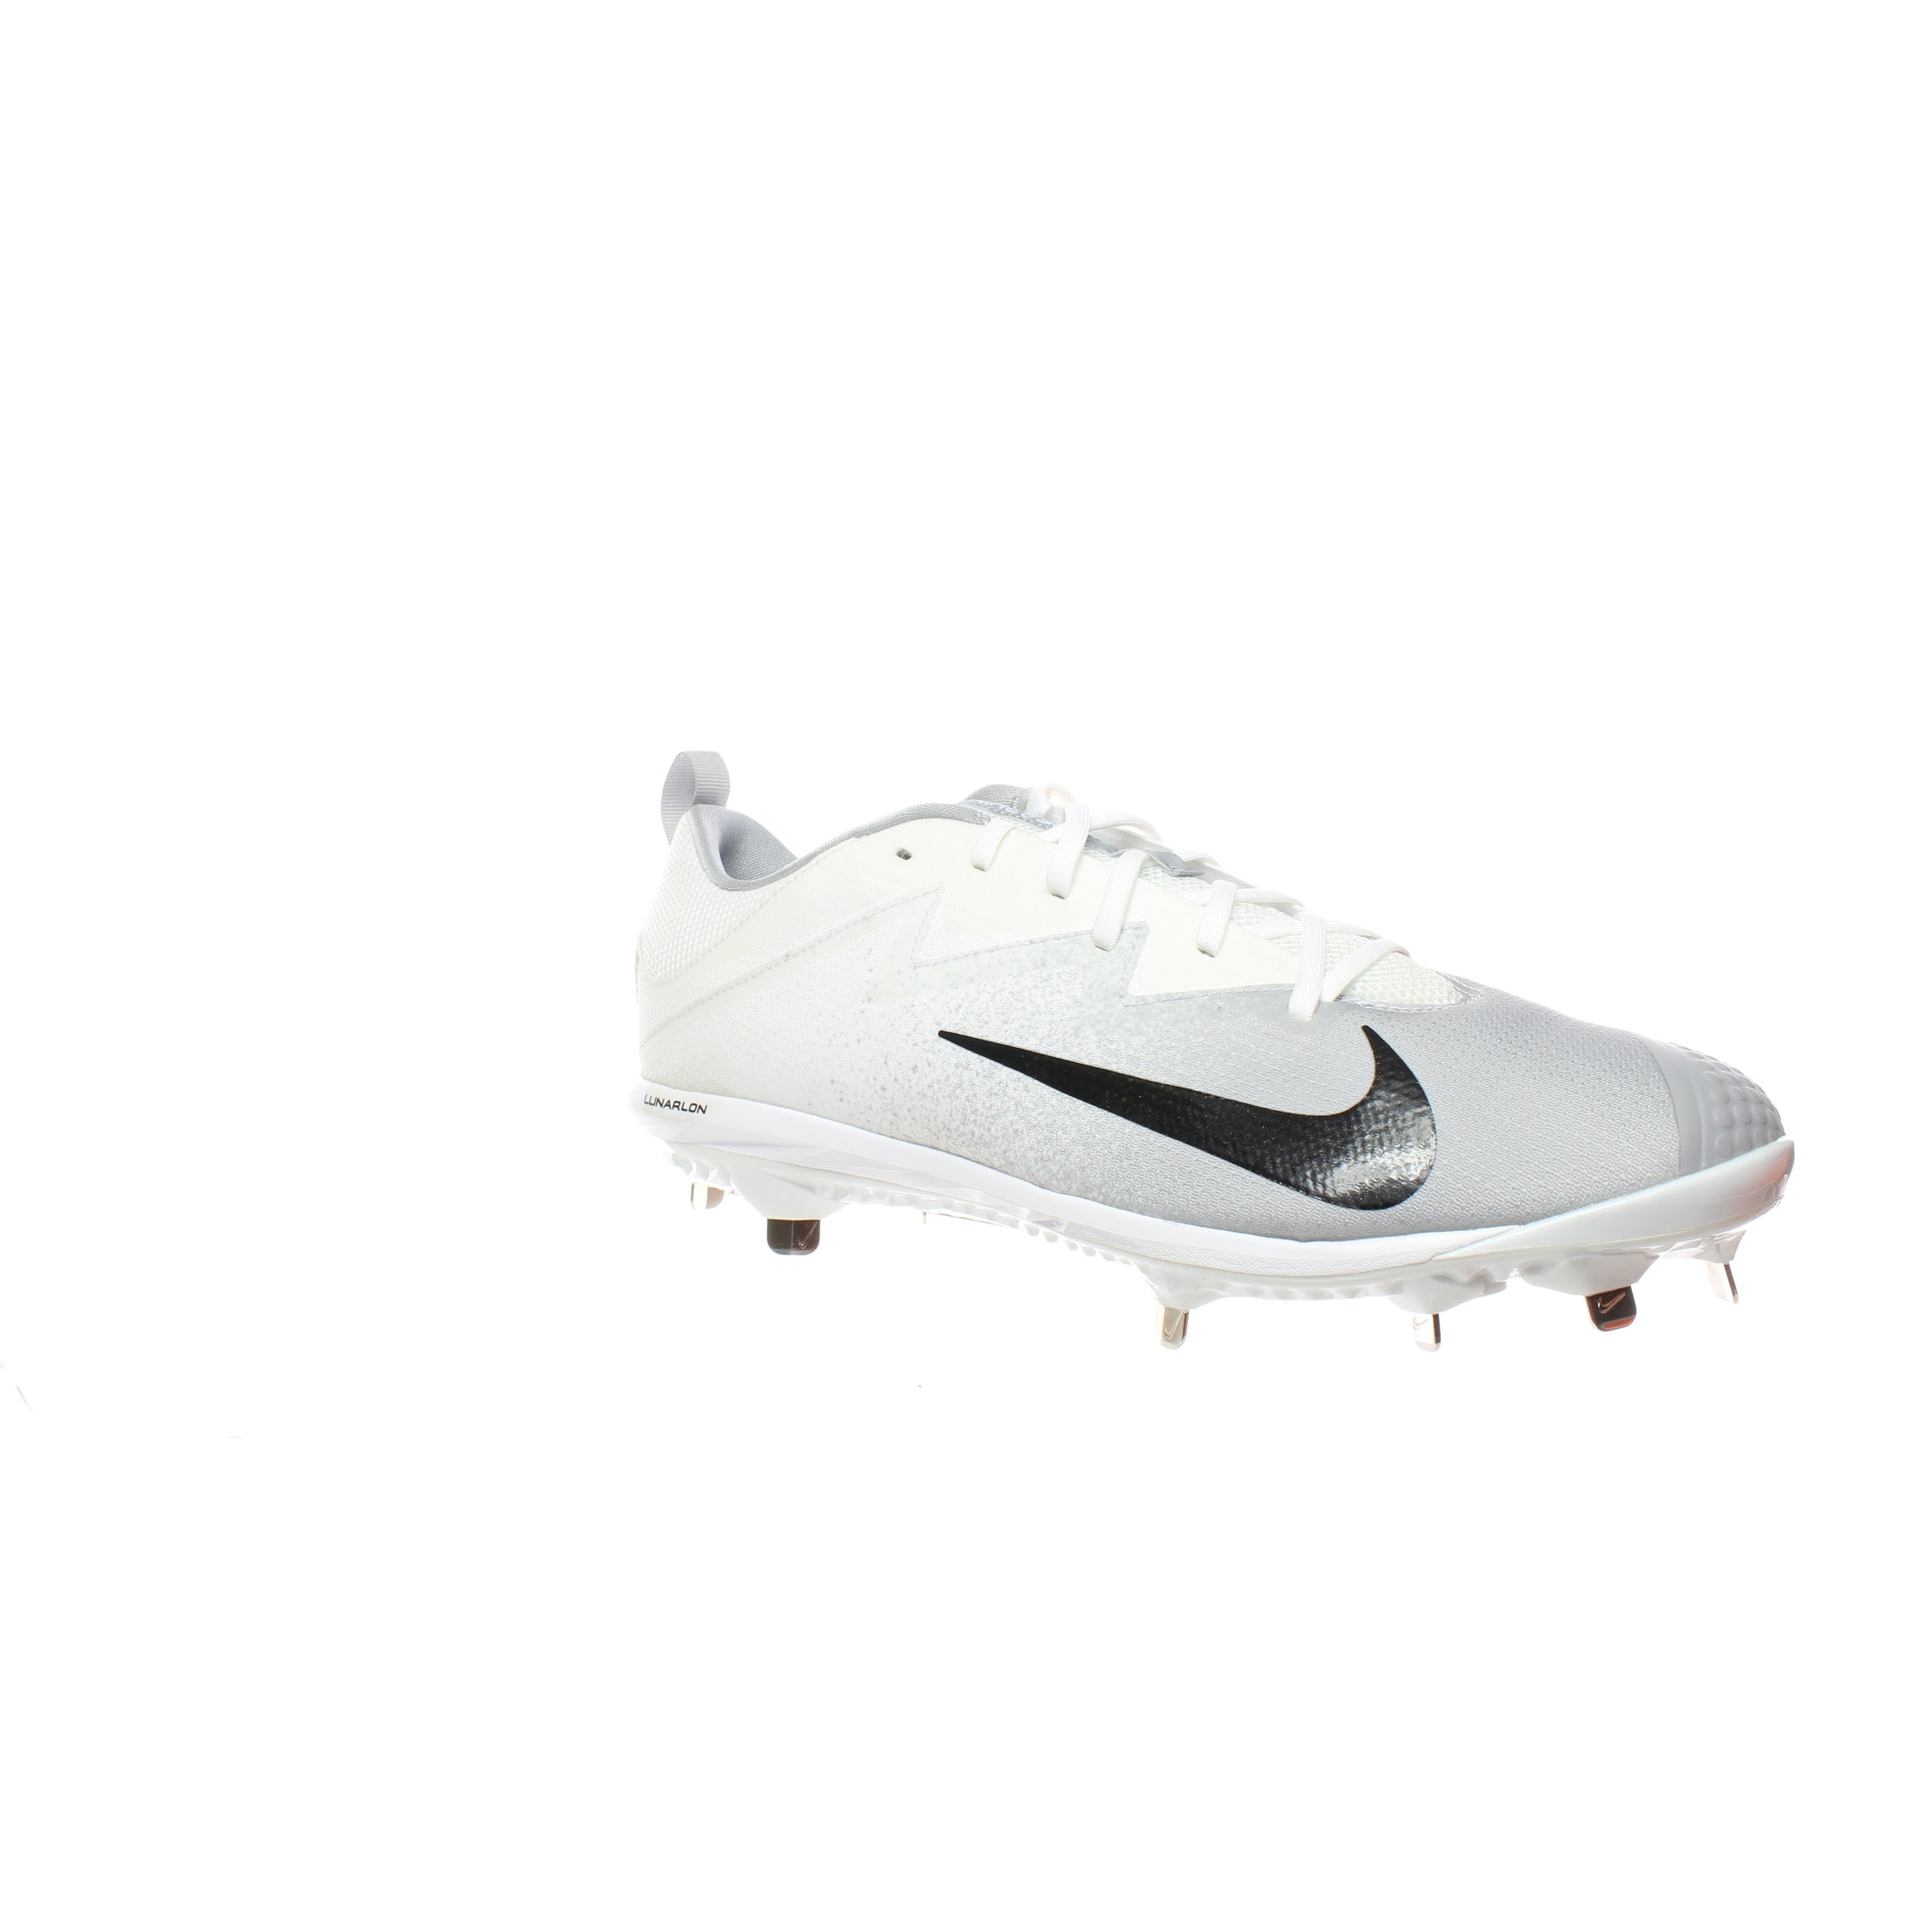 size 14 cleats